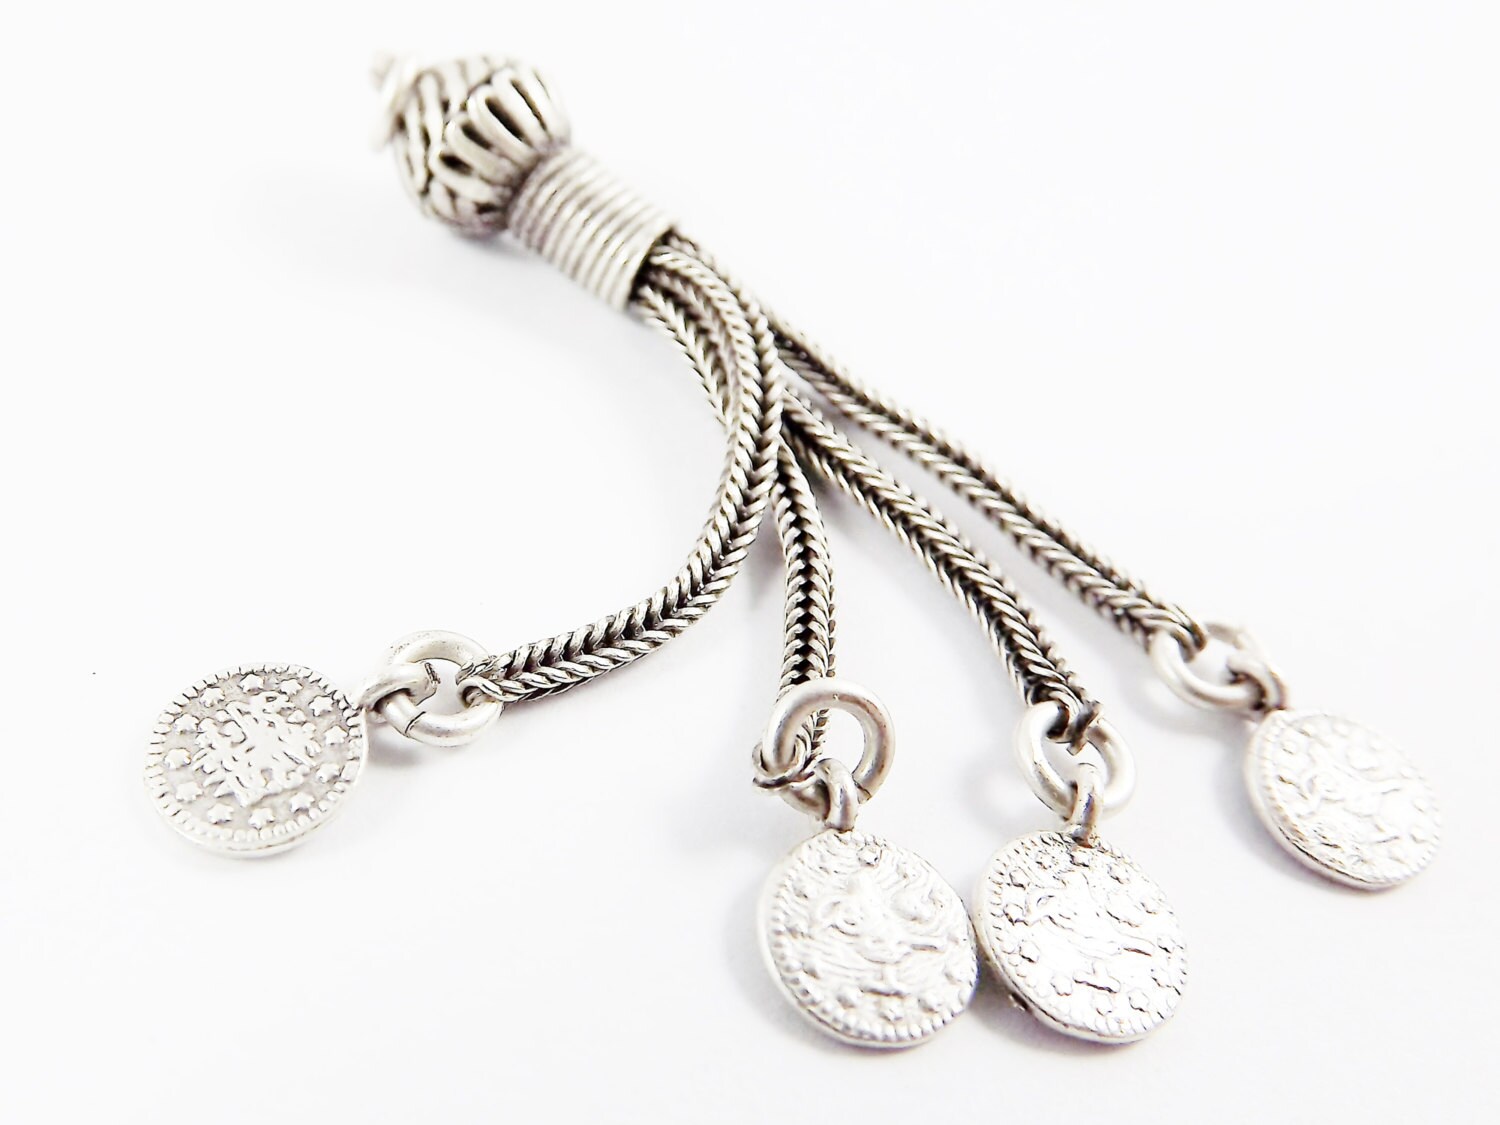 Tassel Pendant with Snake Chain Strands & Coin Charms - Matte Antique Silver Plated Brass - 1PC